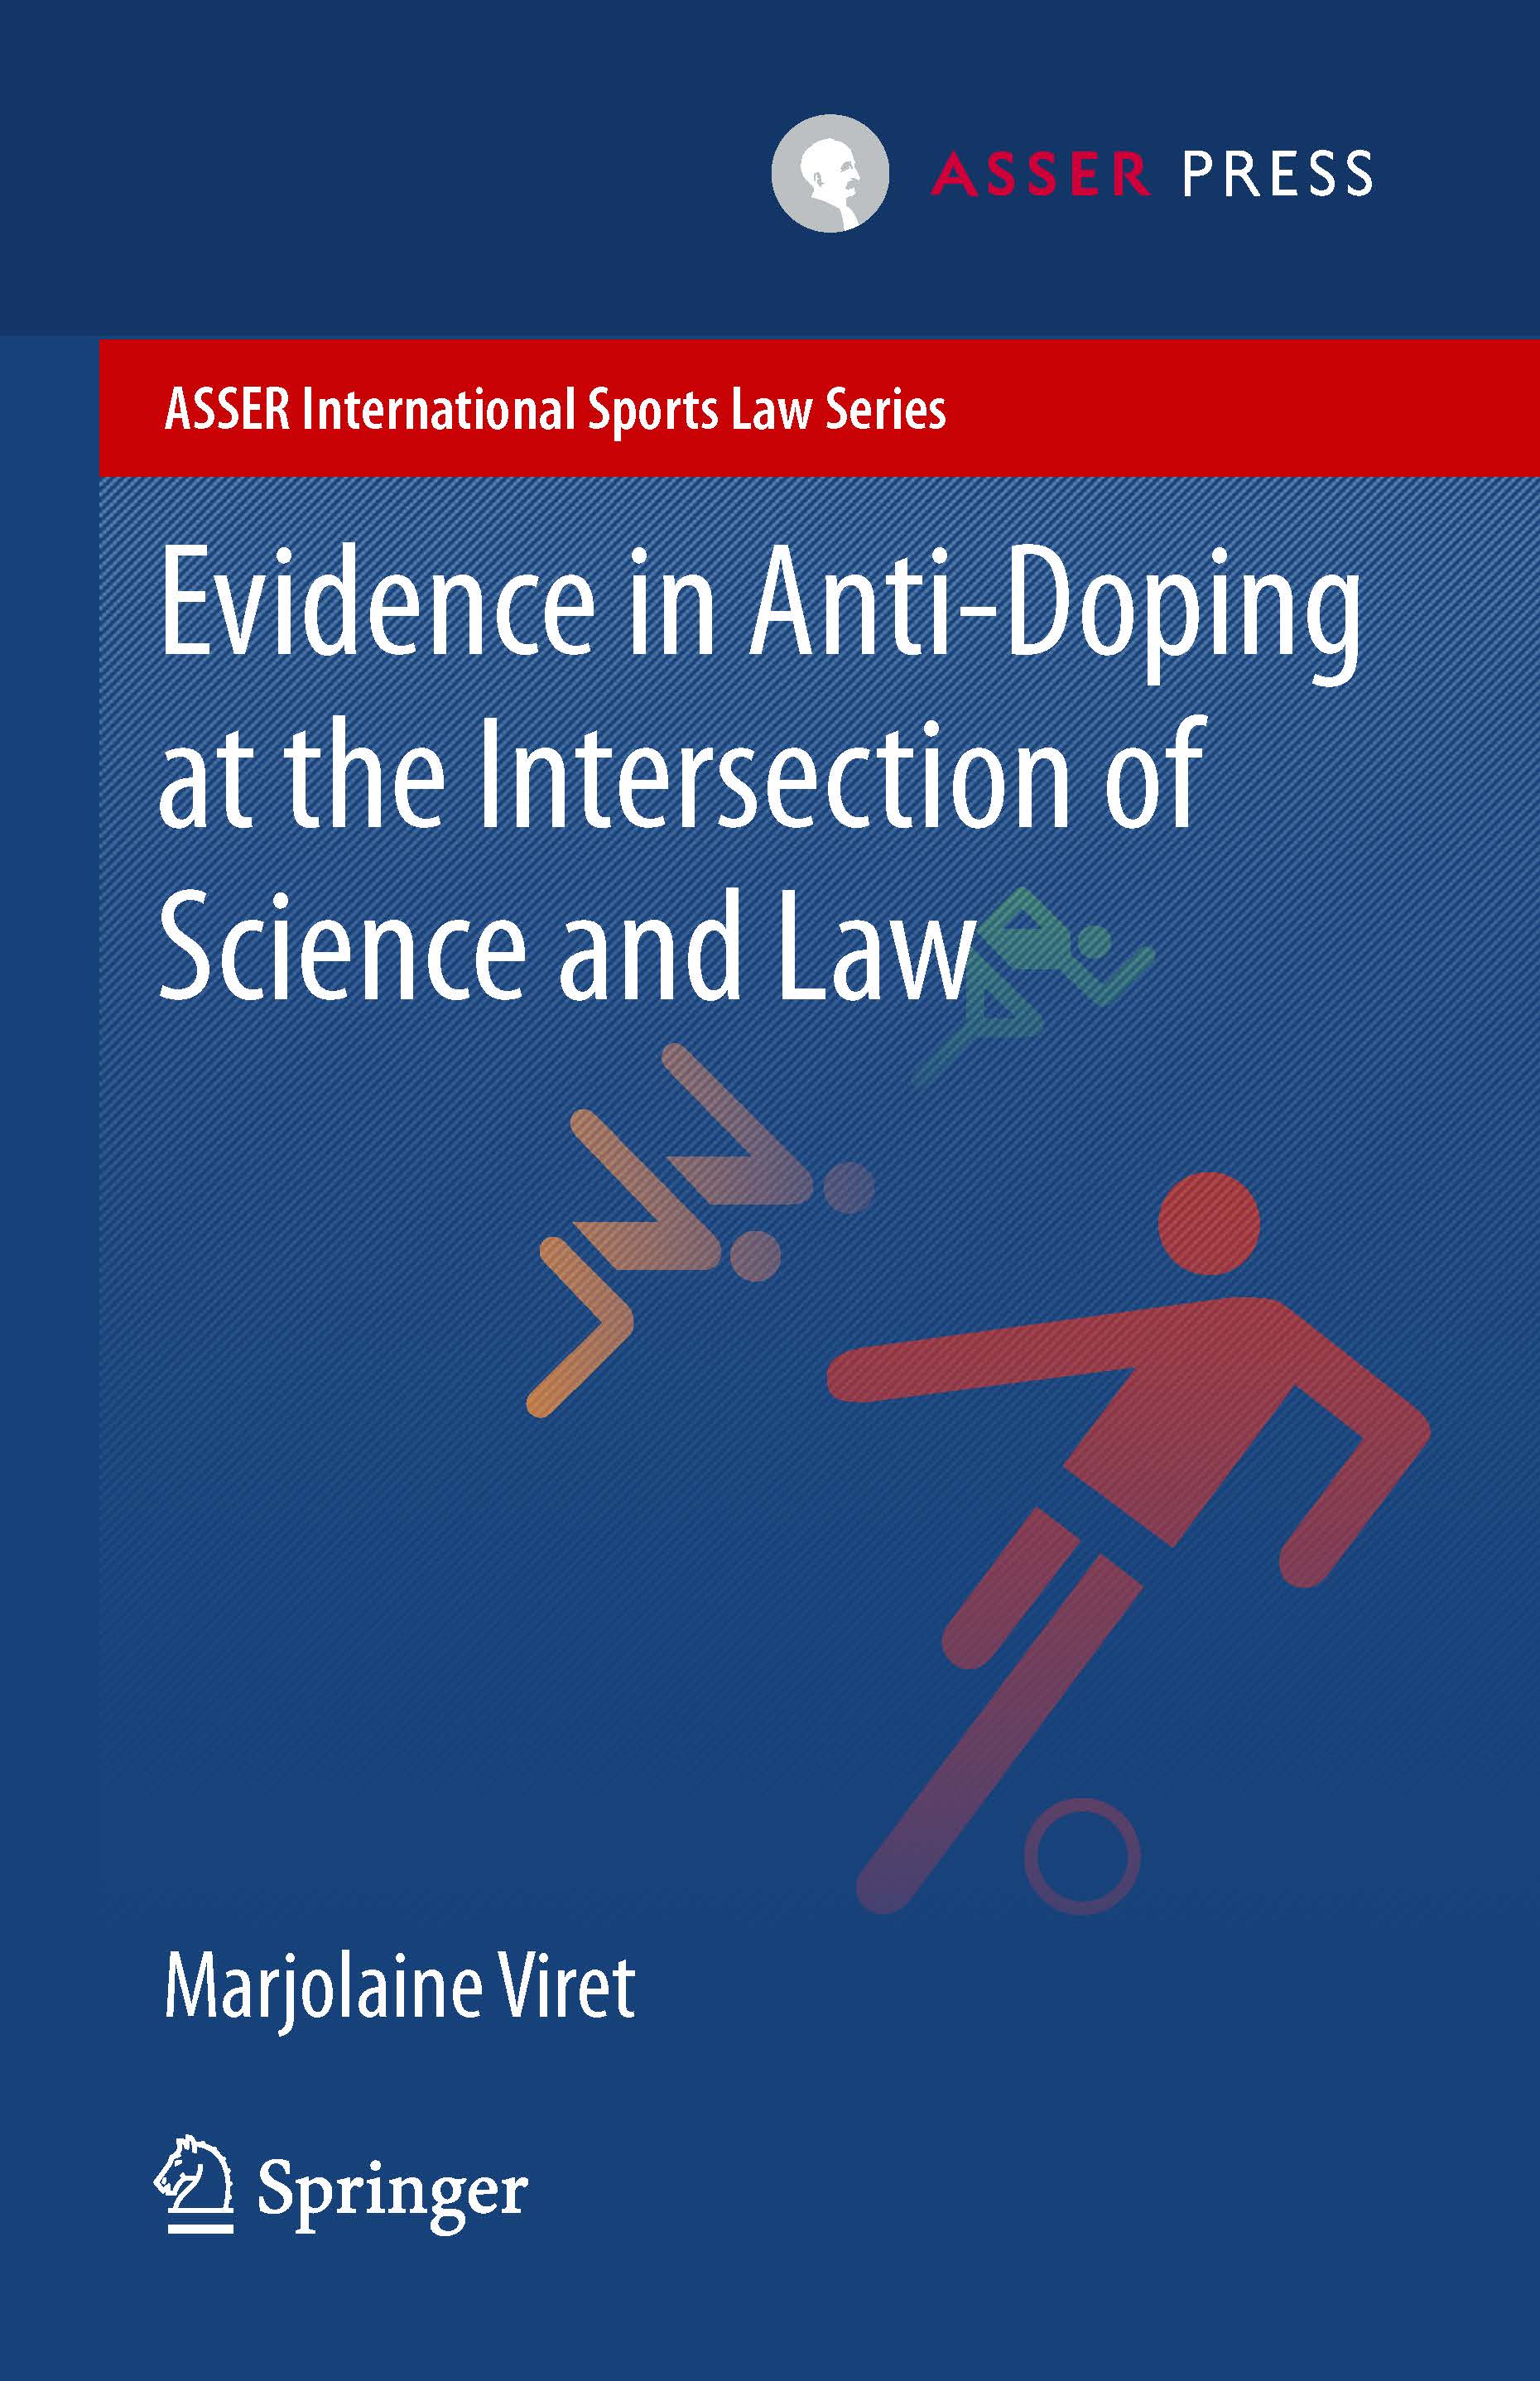 Evidence in Anti-Doping at the Intersection of Science & Law